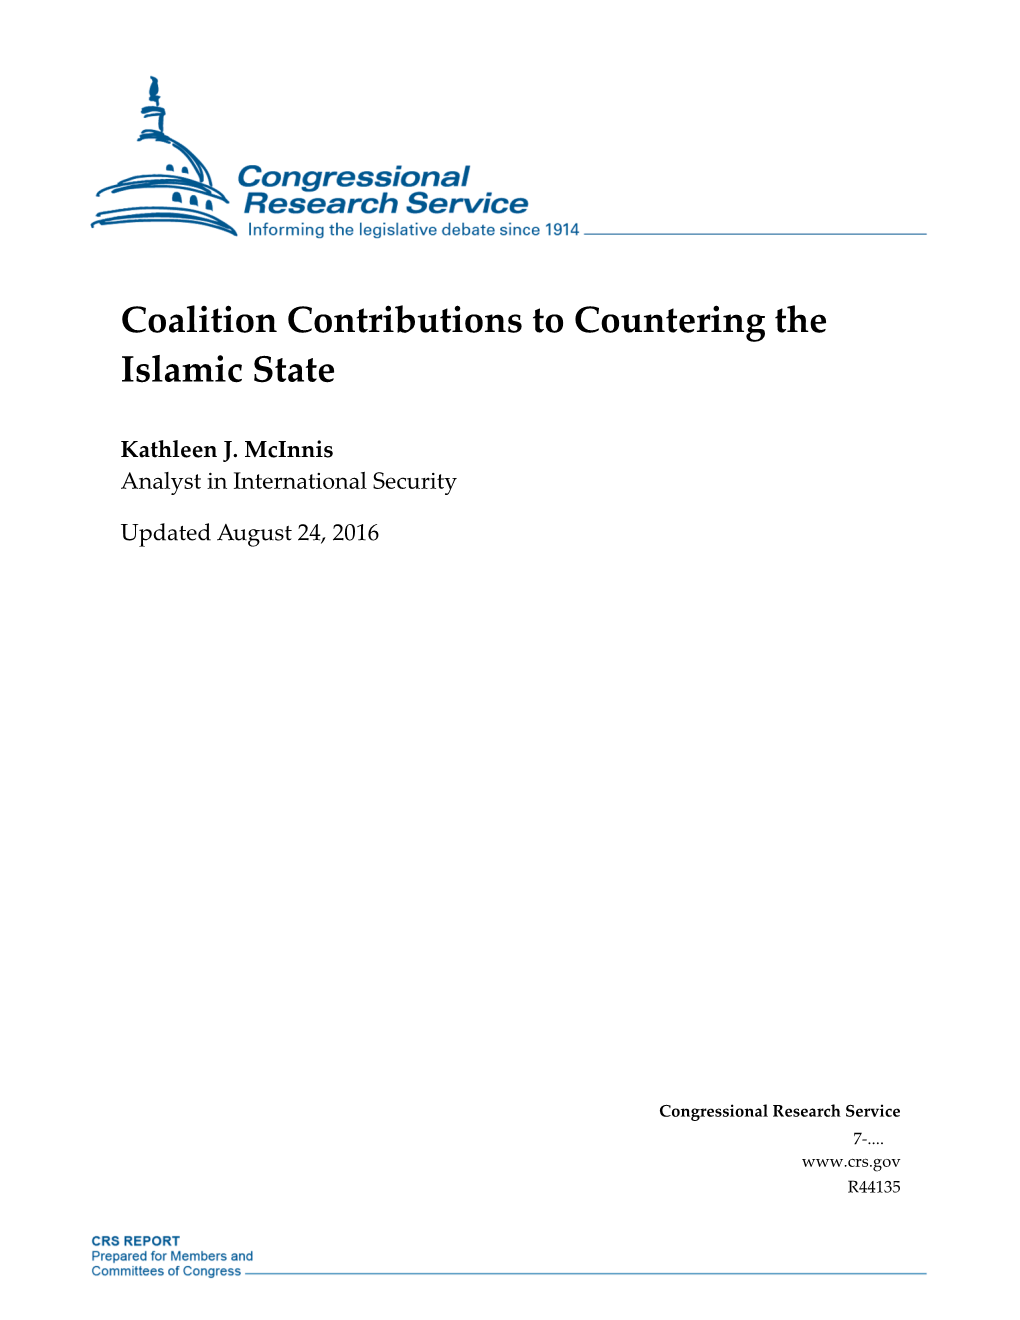 Coalition Contributions to Countering the Islamic State